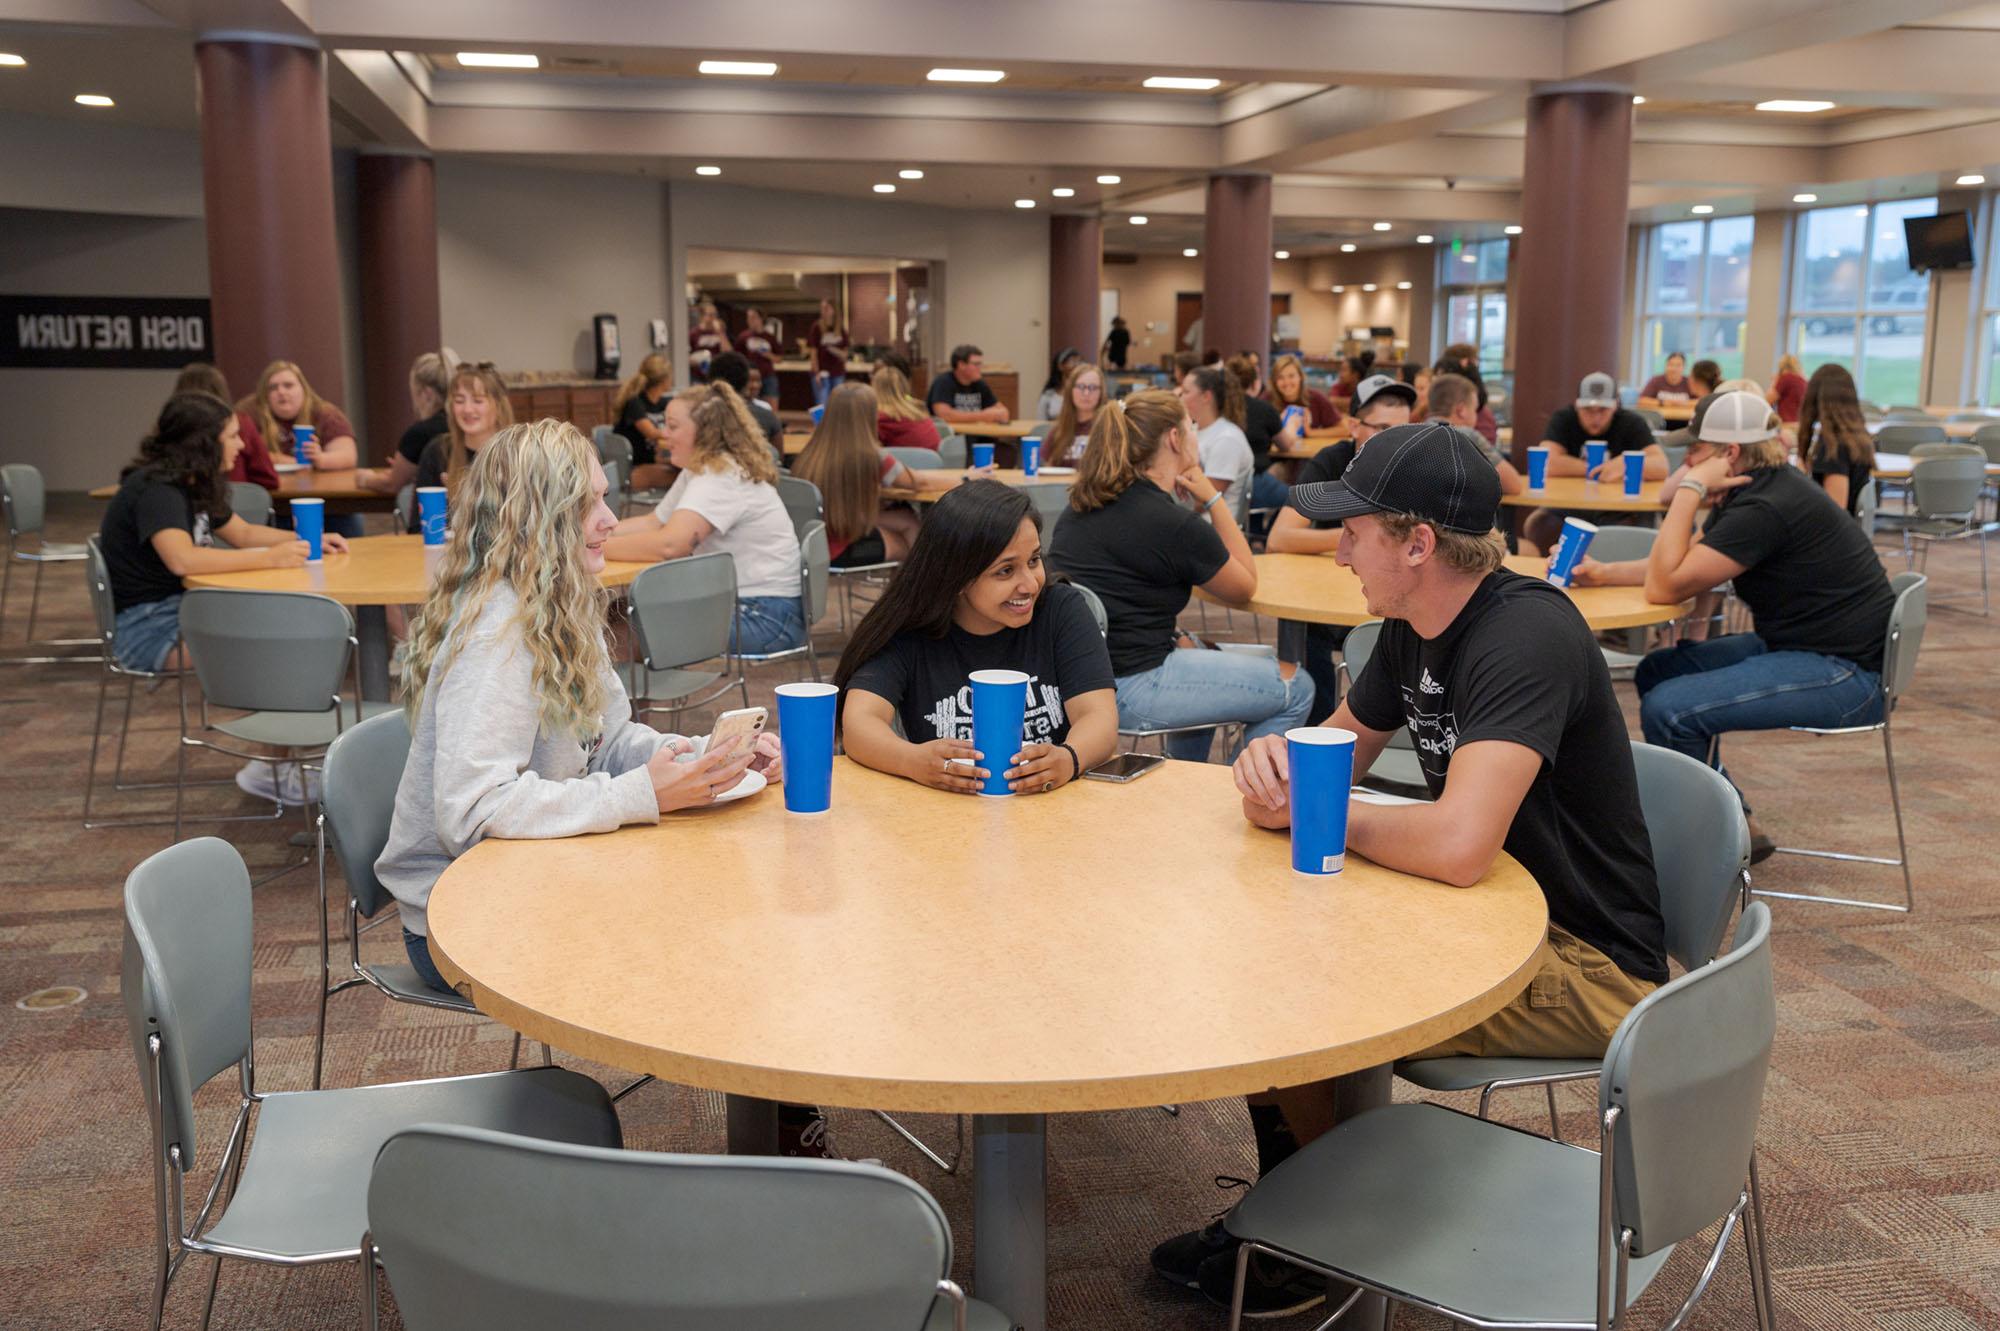 Students eating in the cafeteria